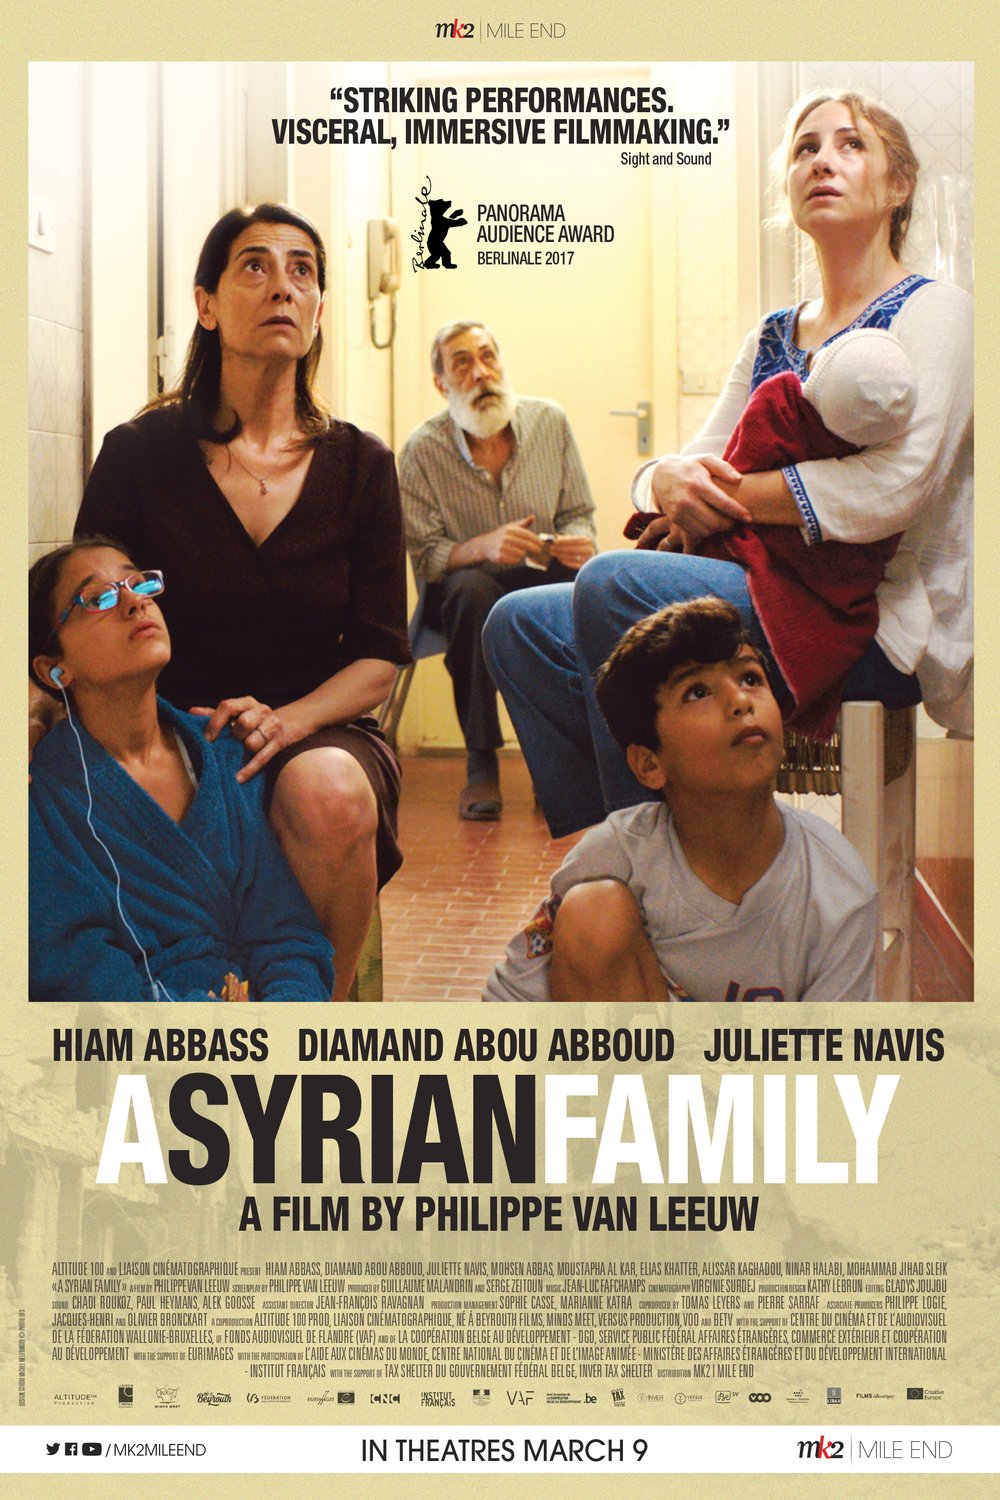 Poster of the movie InSyriated